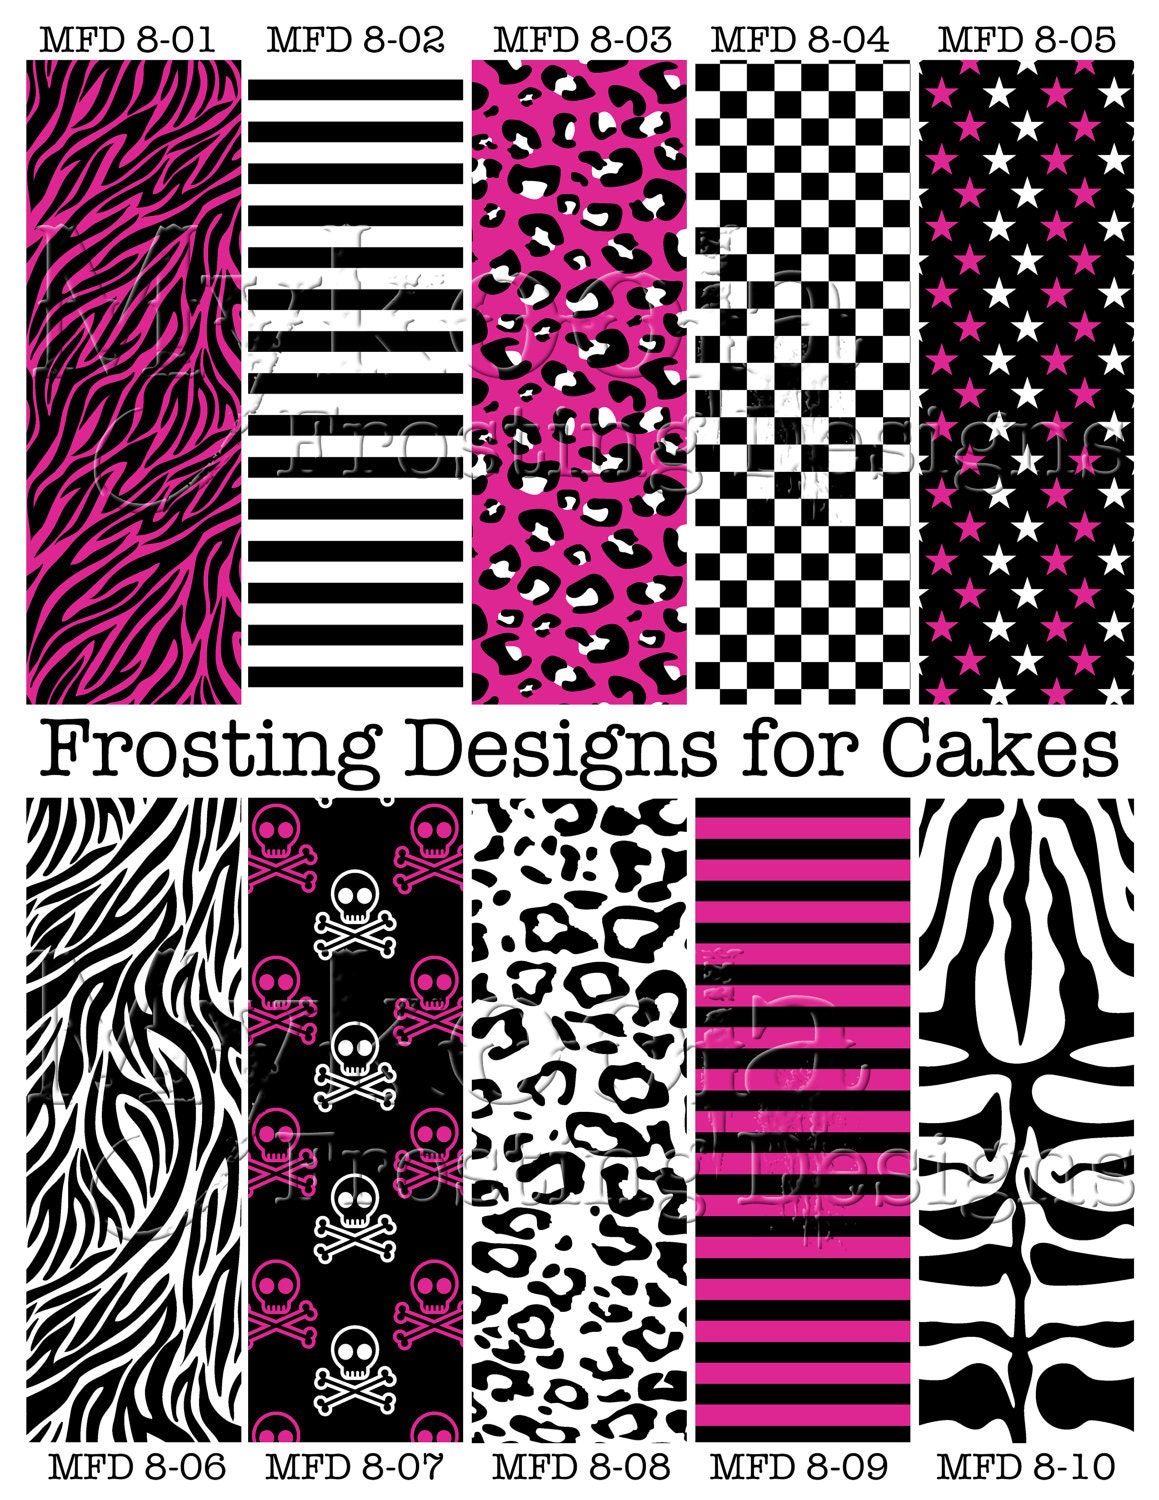 Punk edible Frosting Designs